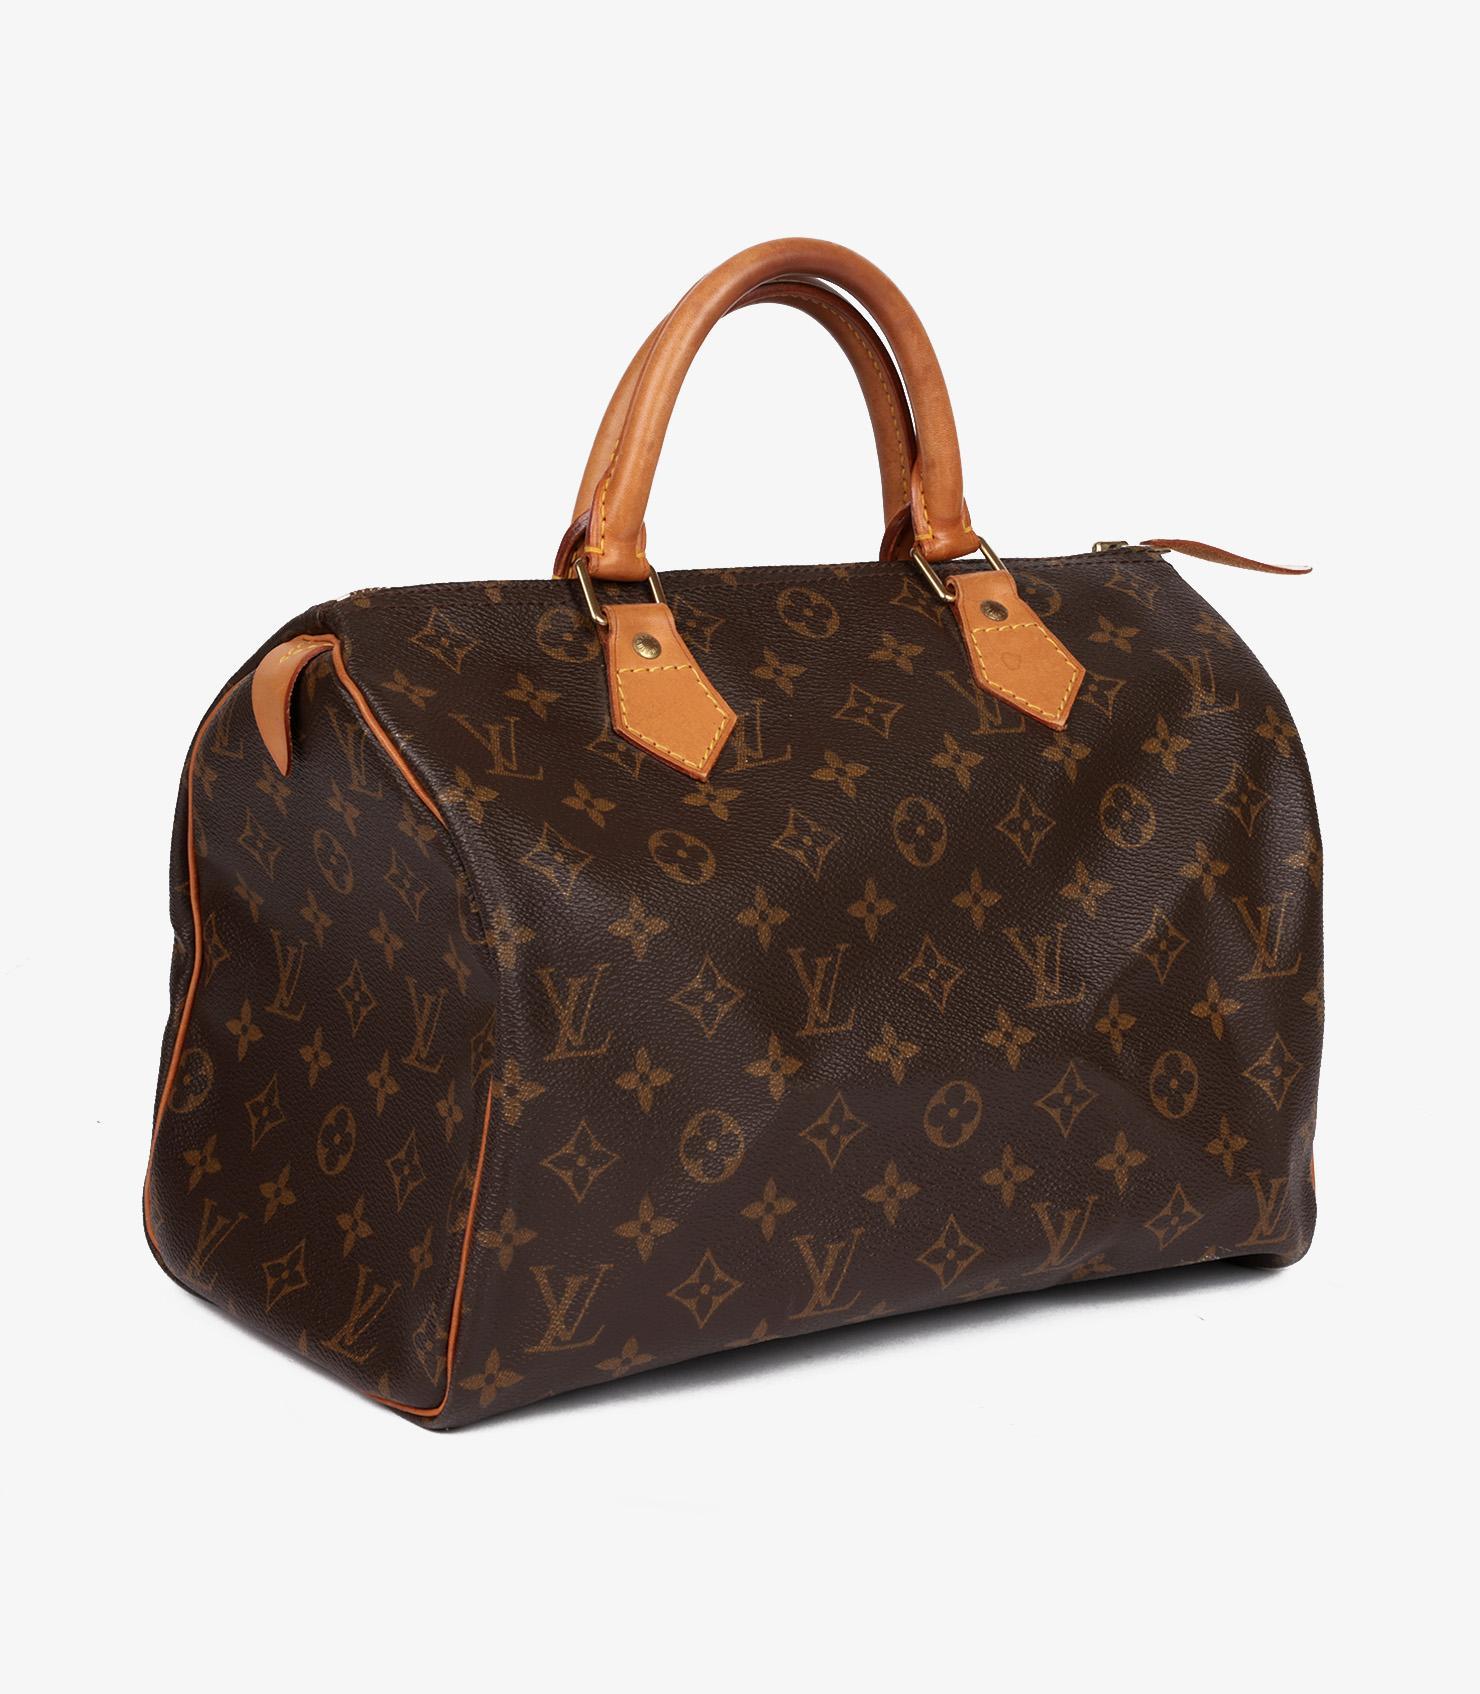 Brand- Louis Vuitton
Model- Speedy 30
Product Type- Shopper, Tote
Serial Number- TH****
Age- Circa 2001
Colour- Brown
Hardware- Golden Brass
Material(s)- Coated Canvas, Vachetta Leather

Height- 21cm
Width- 30cm
Depth- 17cm
Handle Drop-